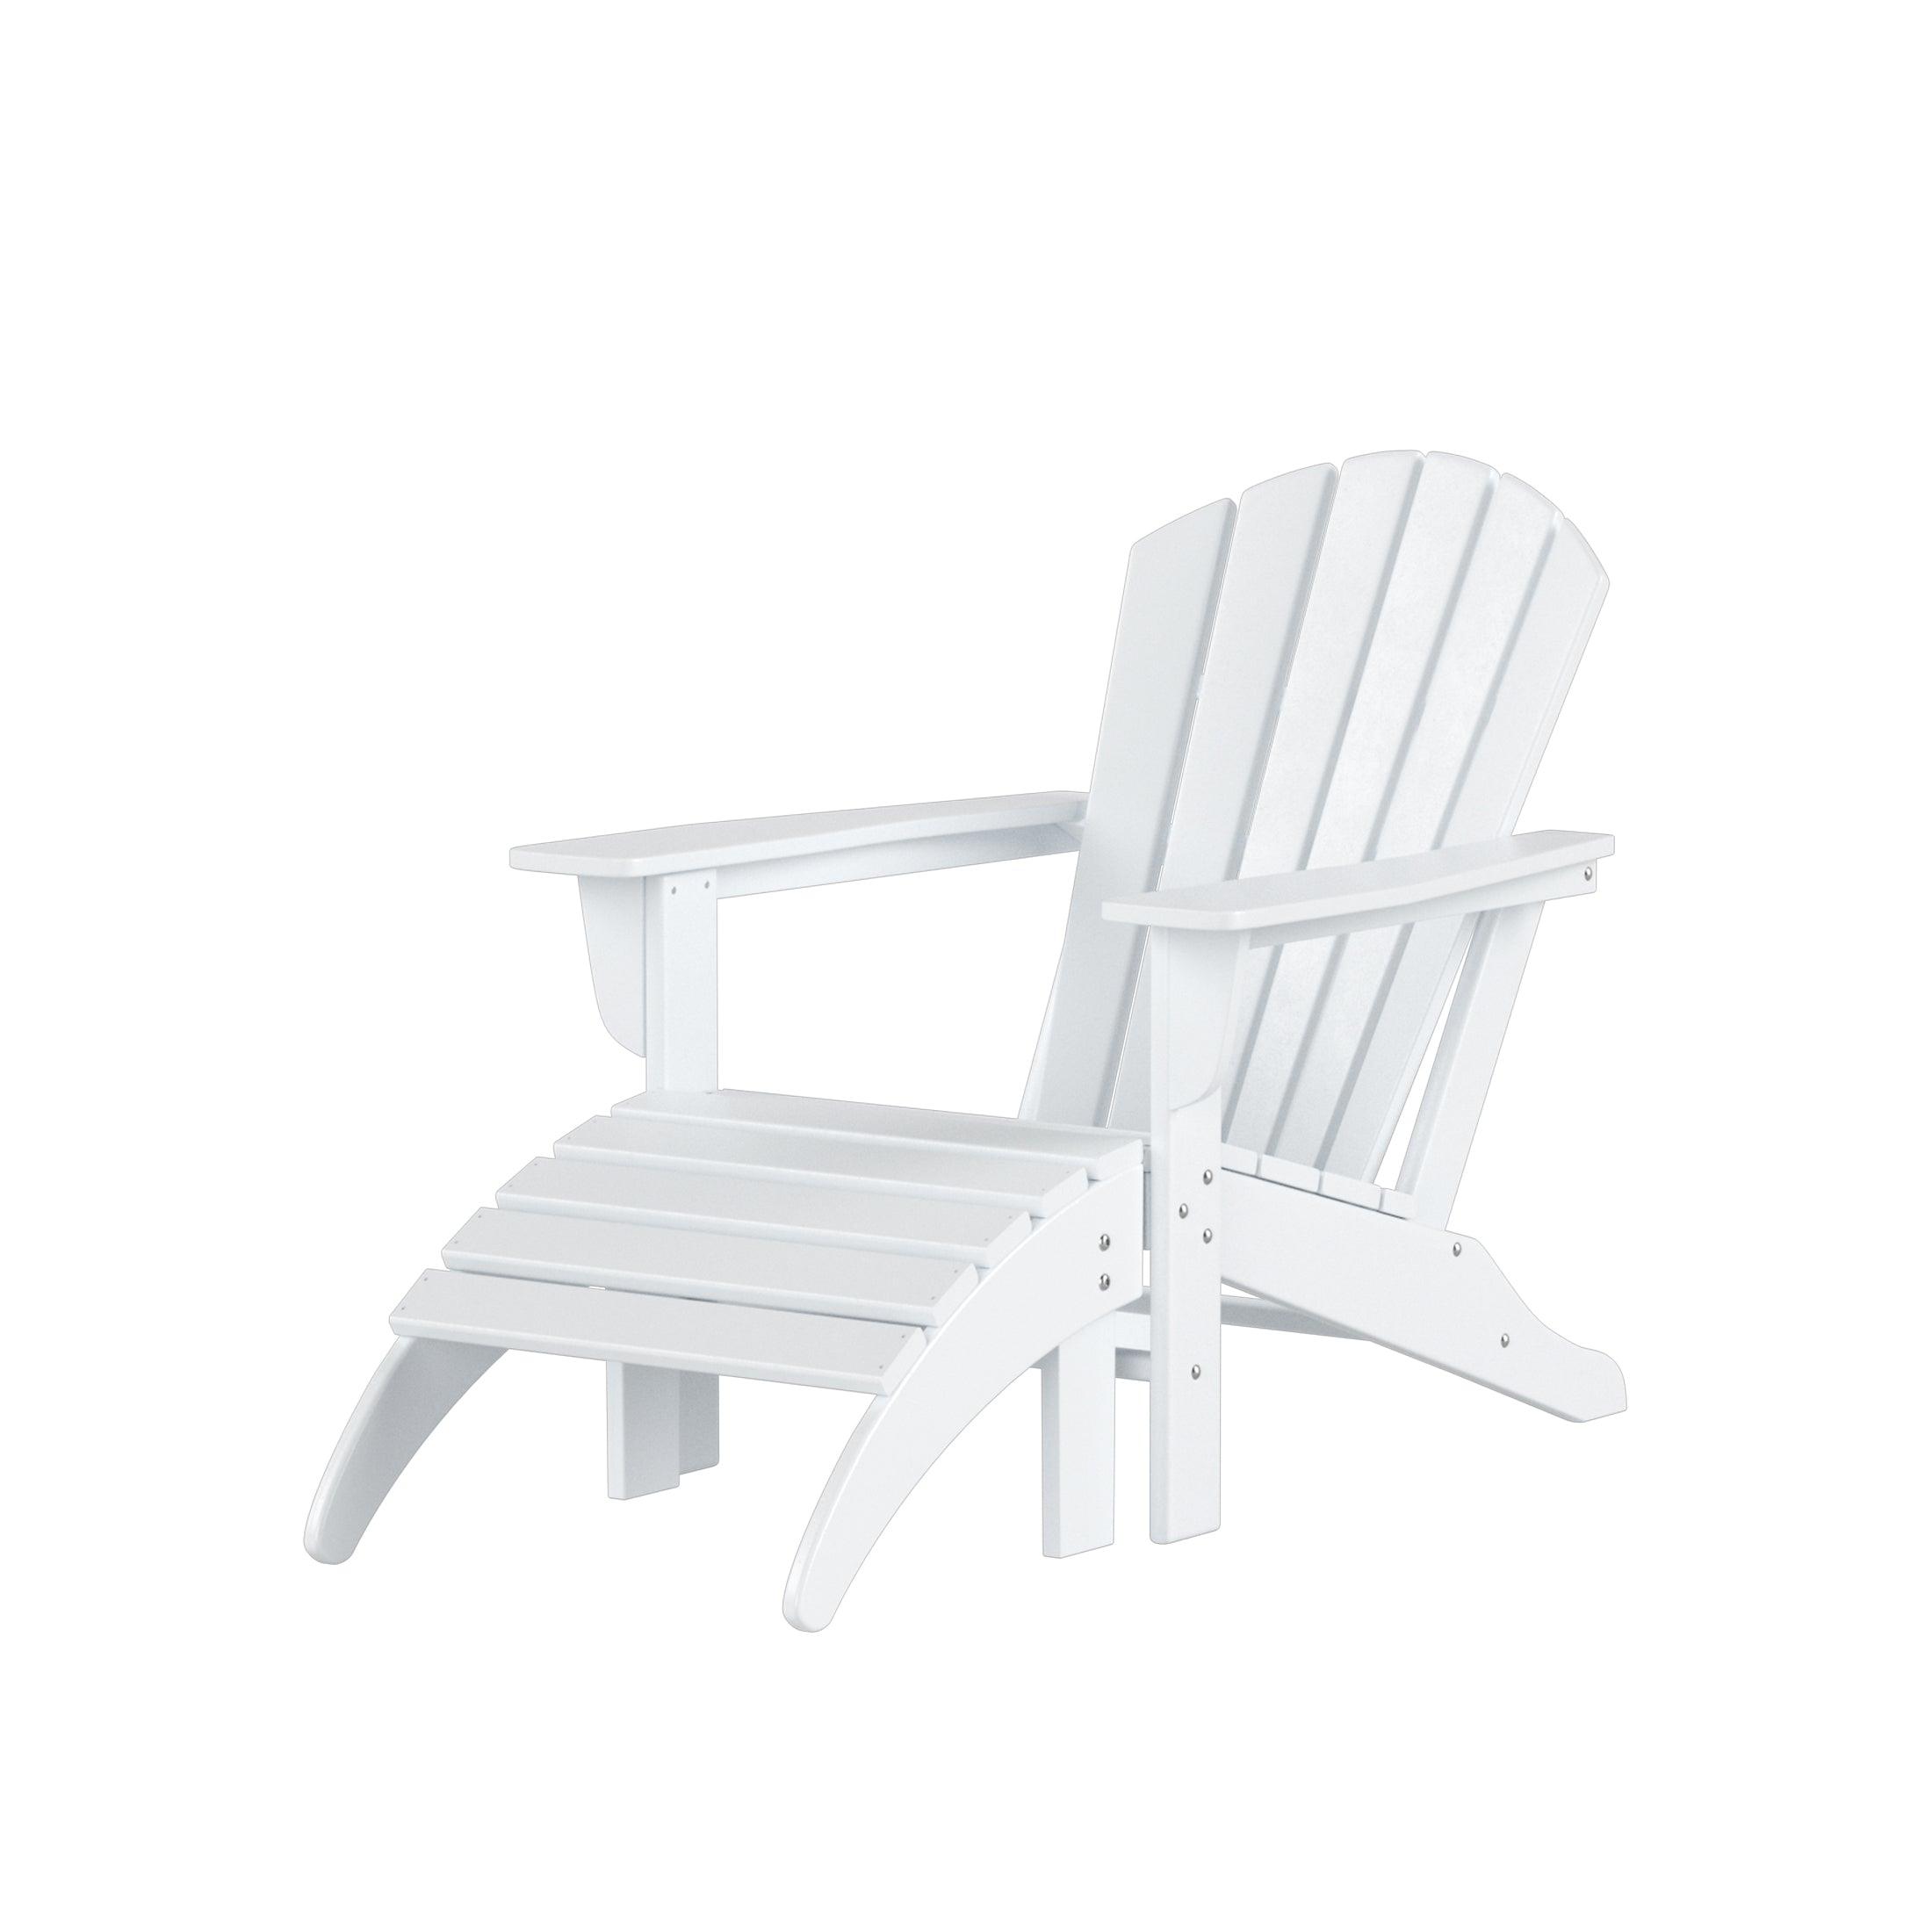 Costaelm Outdoor Adirondack Chair With Ottoman 2-Piece Set, White